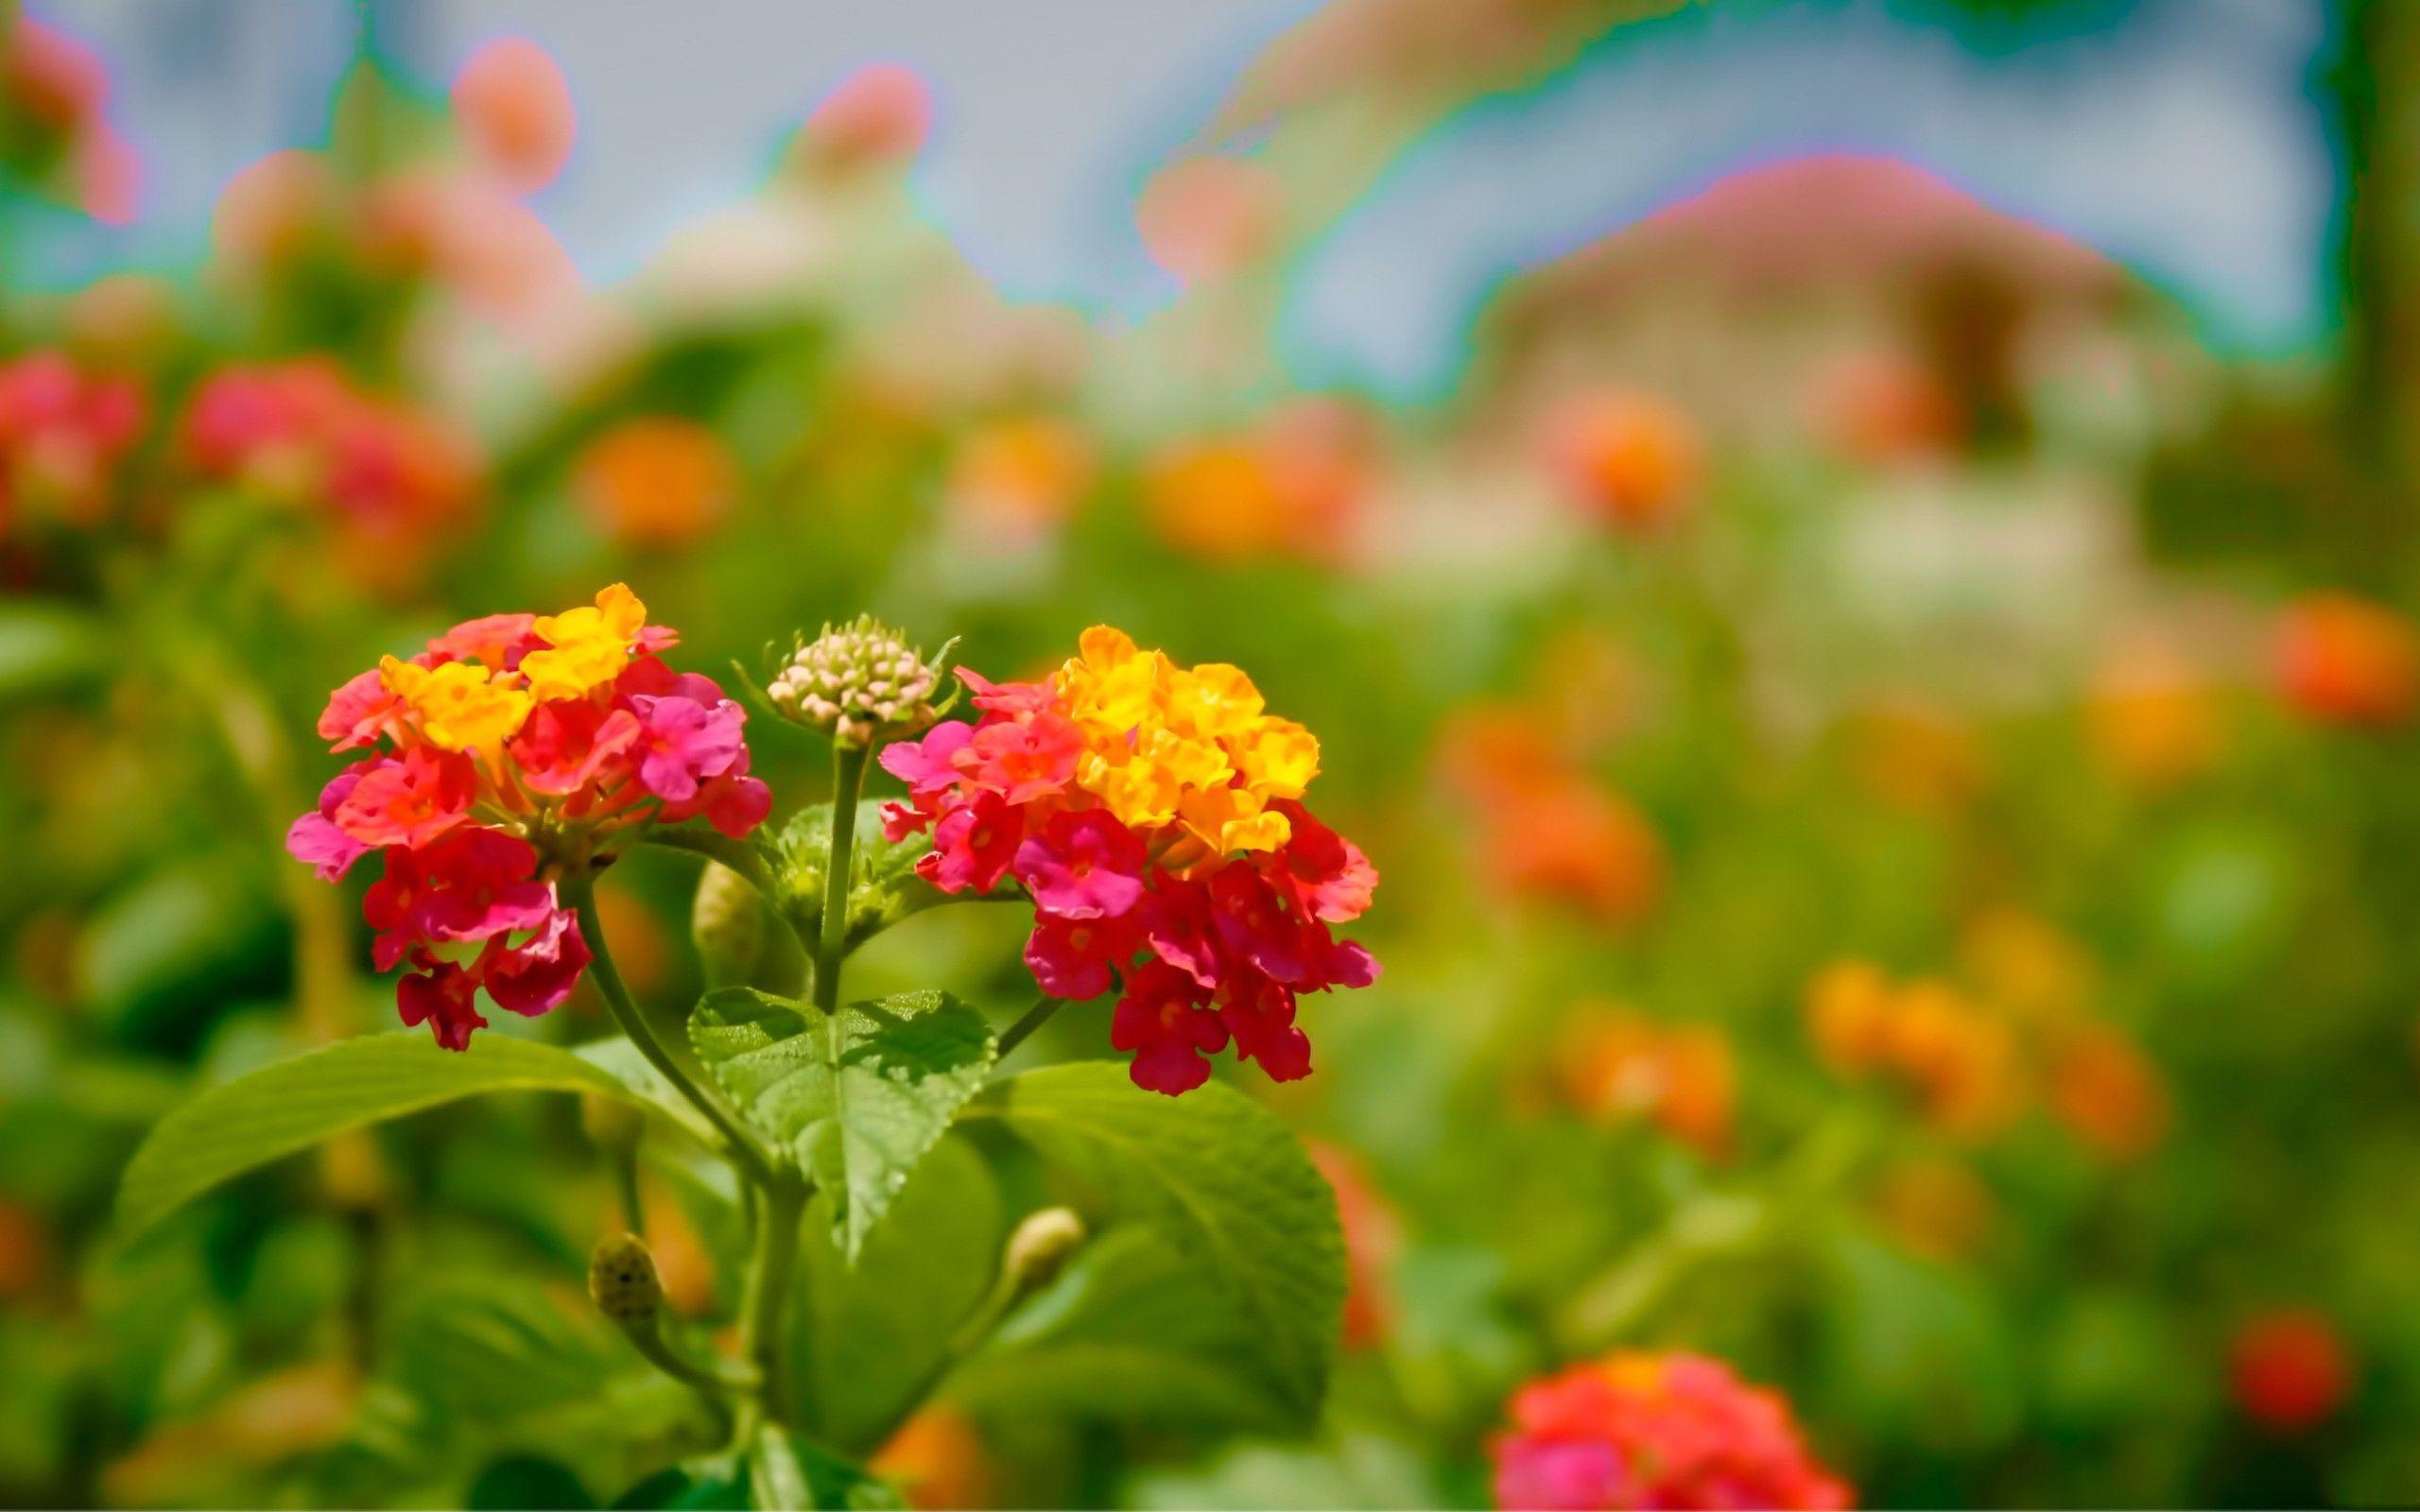 Wallpaper For > Colorful Flowers Field Wallpaper